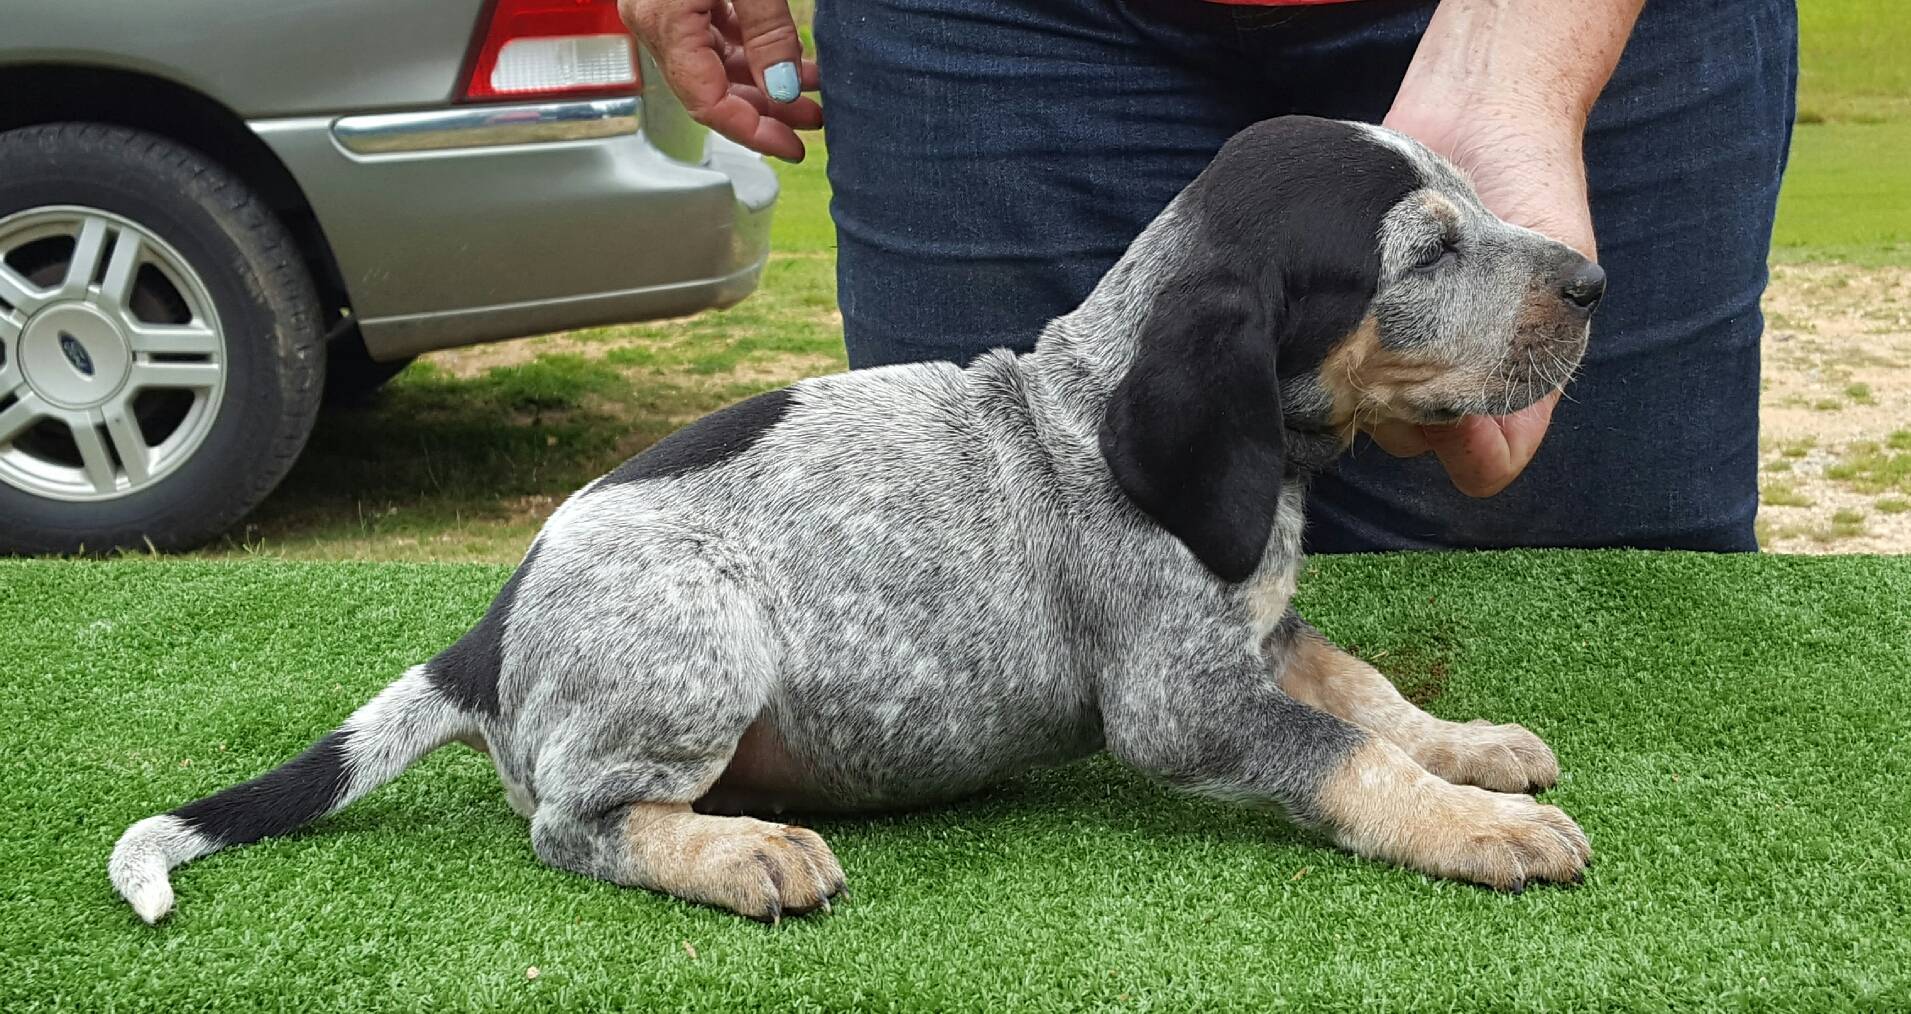 Ukc upcoming events coonhounds